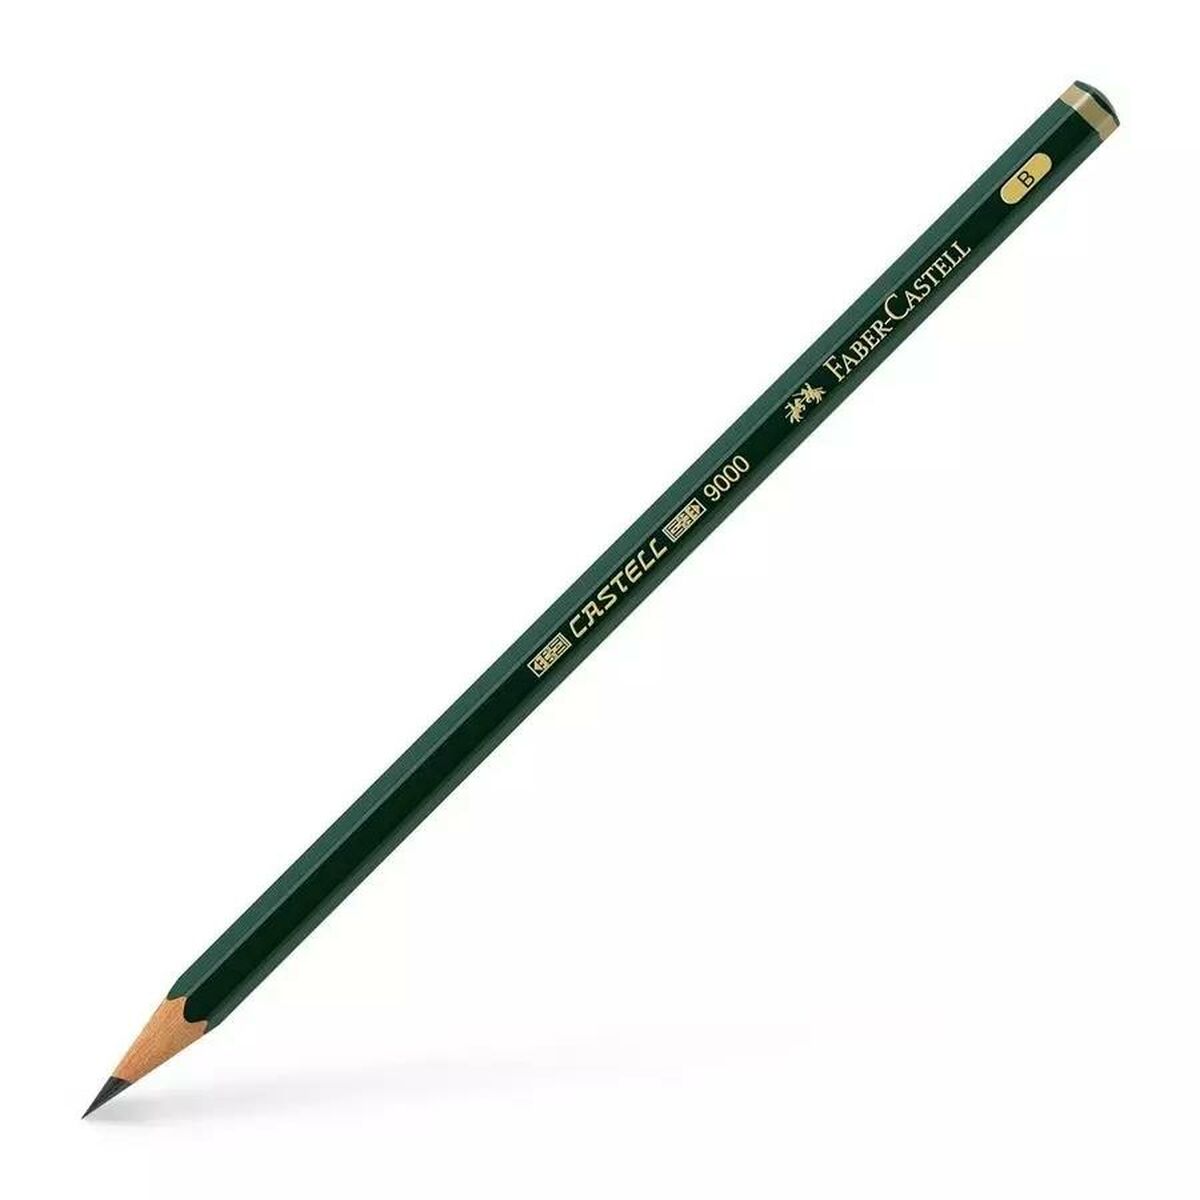 Pencil Faber-Castell 9000 Ecological B (12 Units)